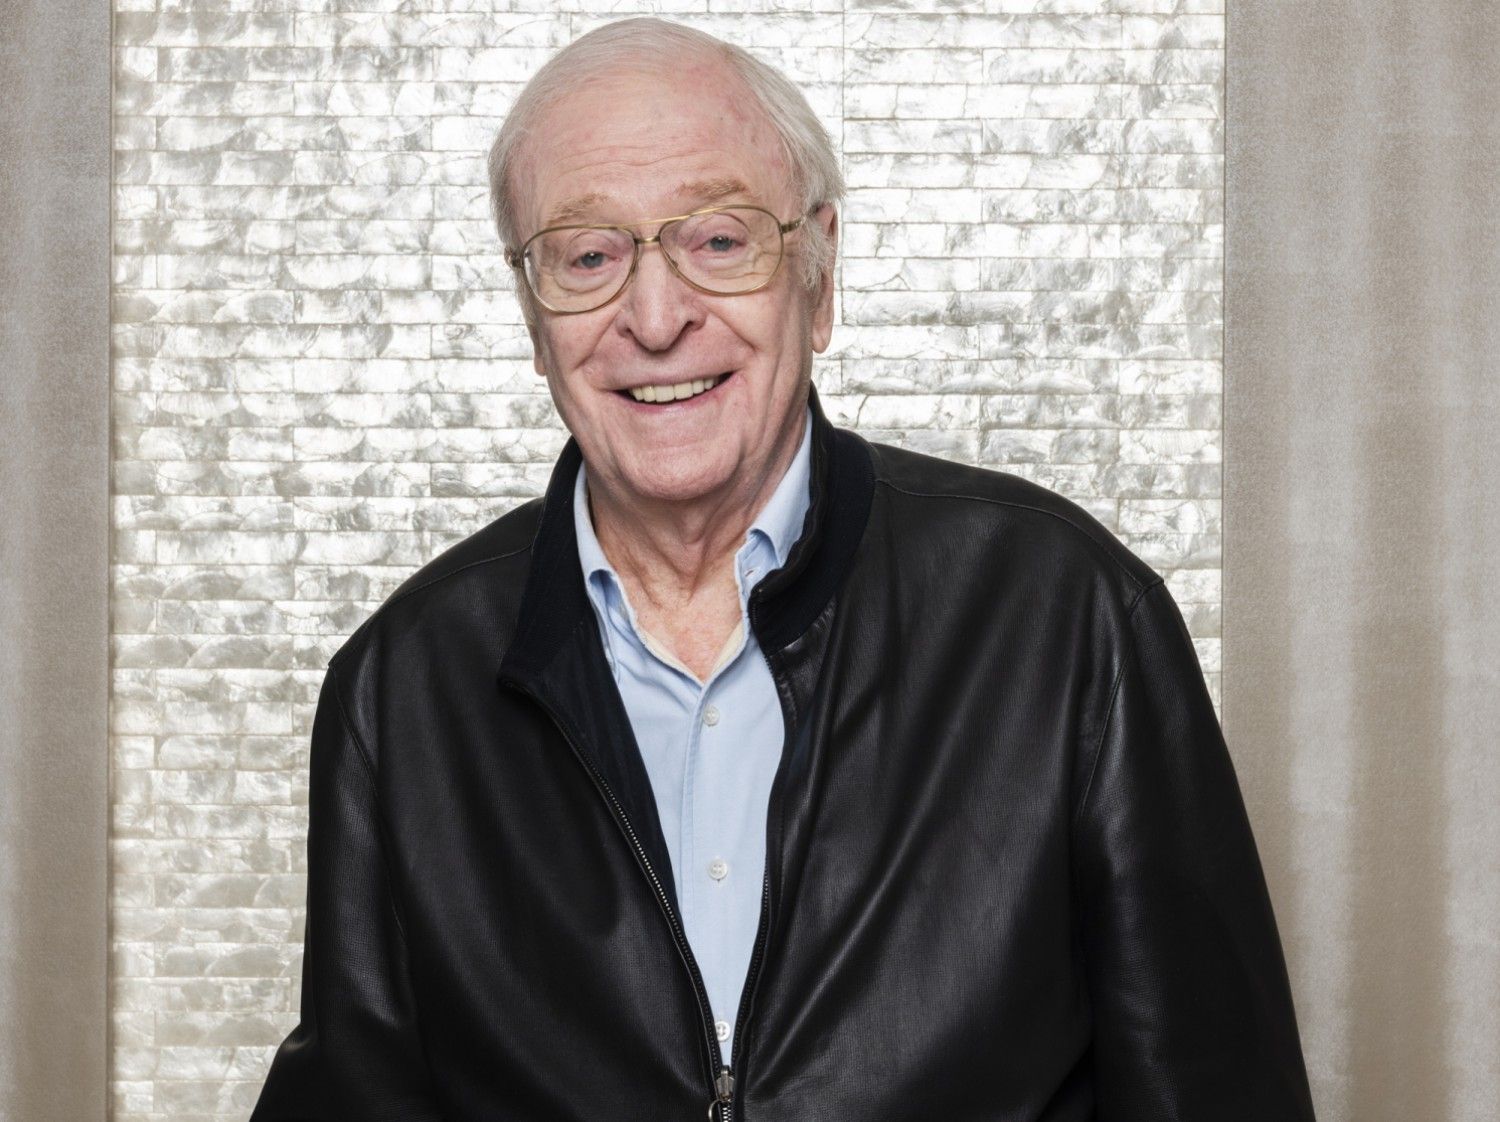 How much is Michael Caine worth?